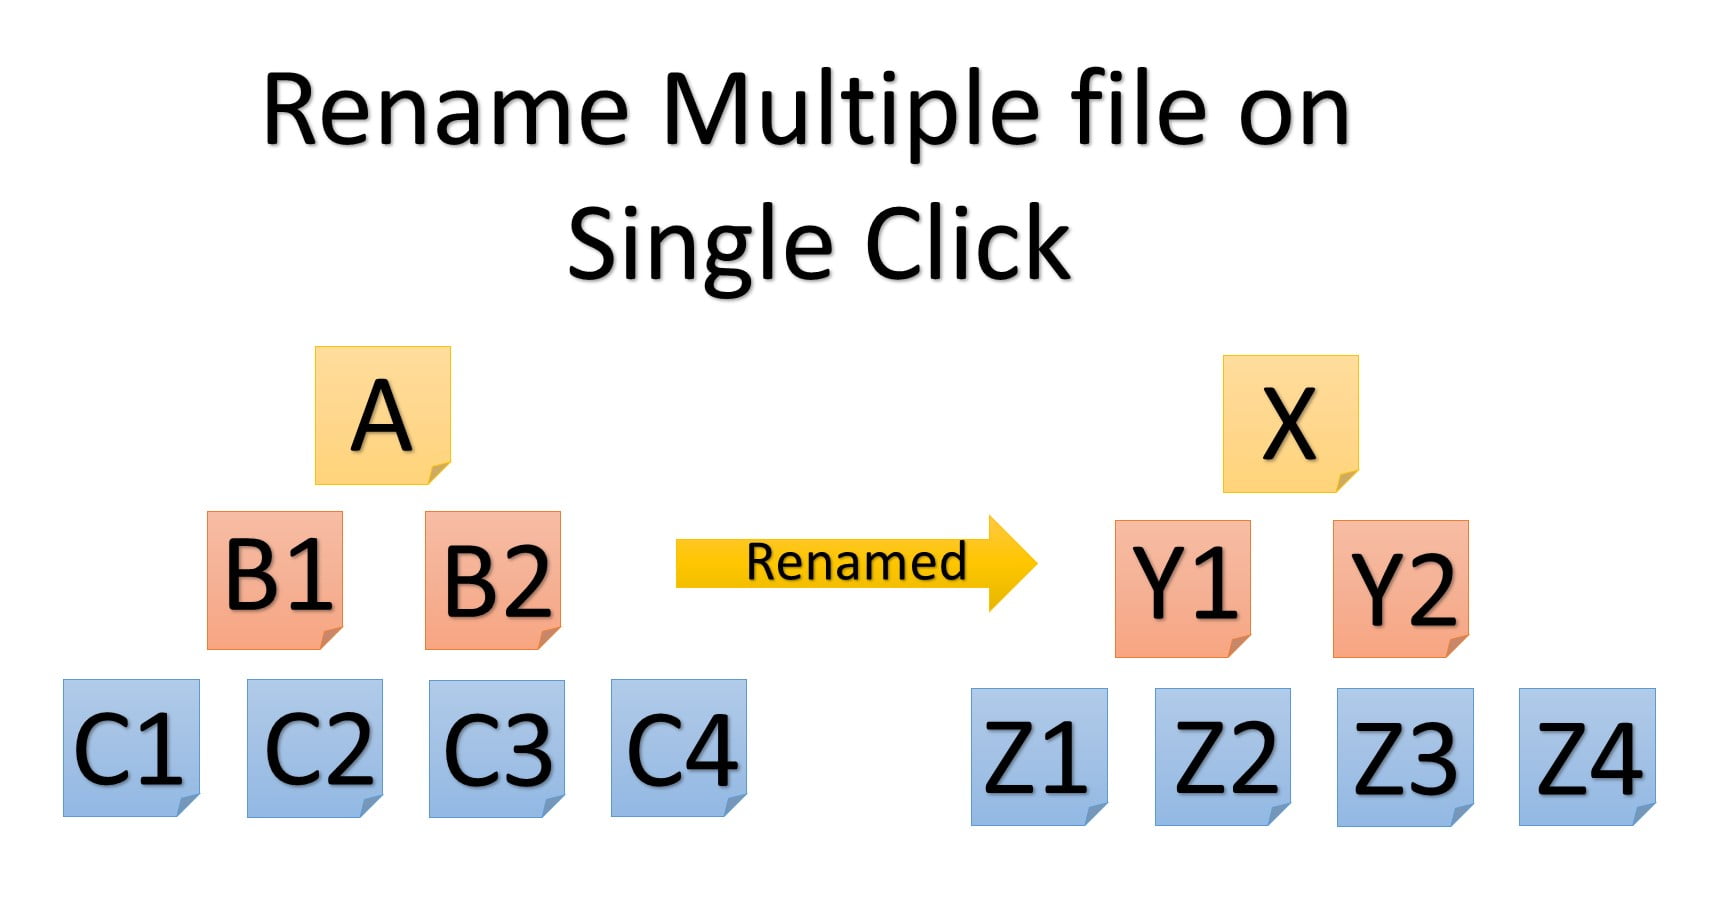 file renaming software from excel file list